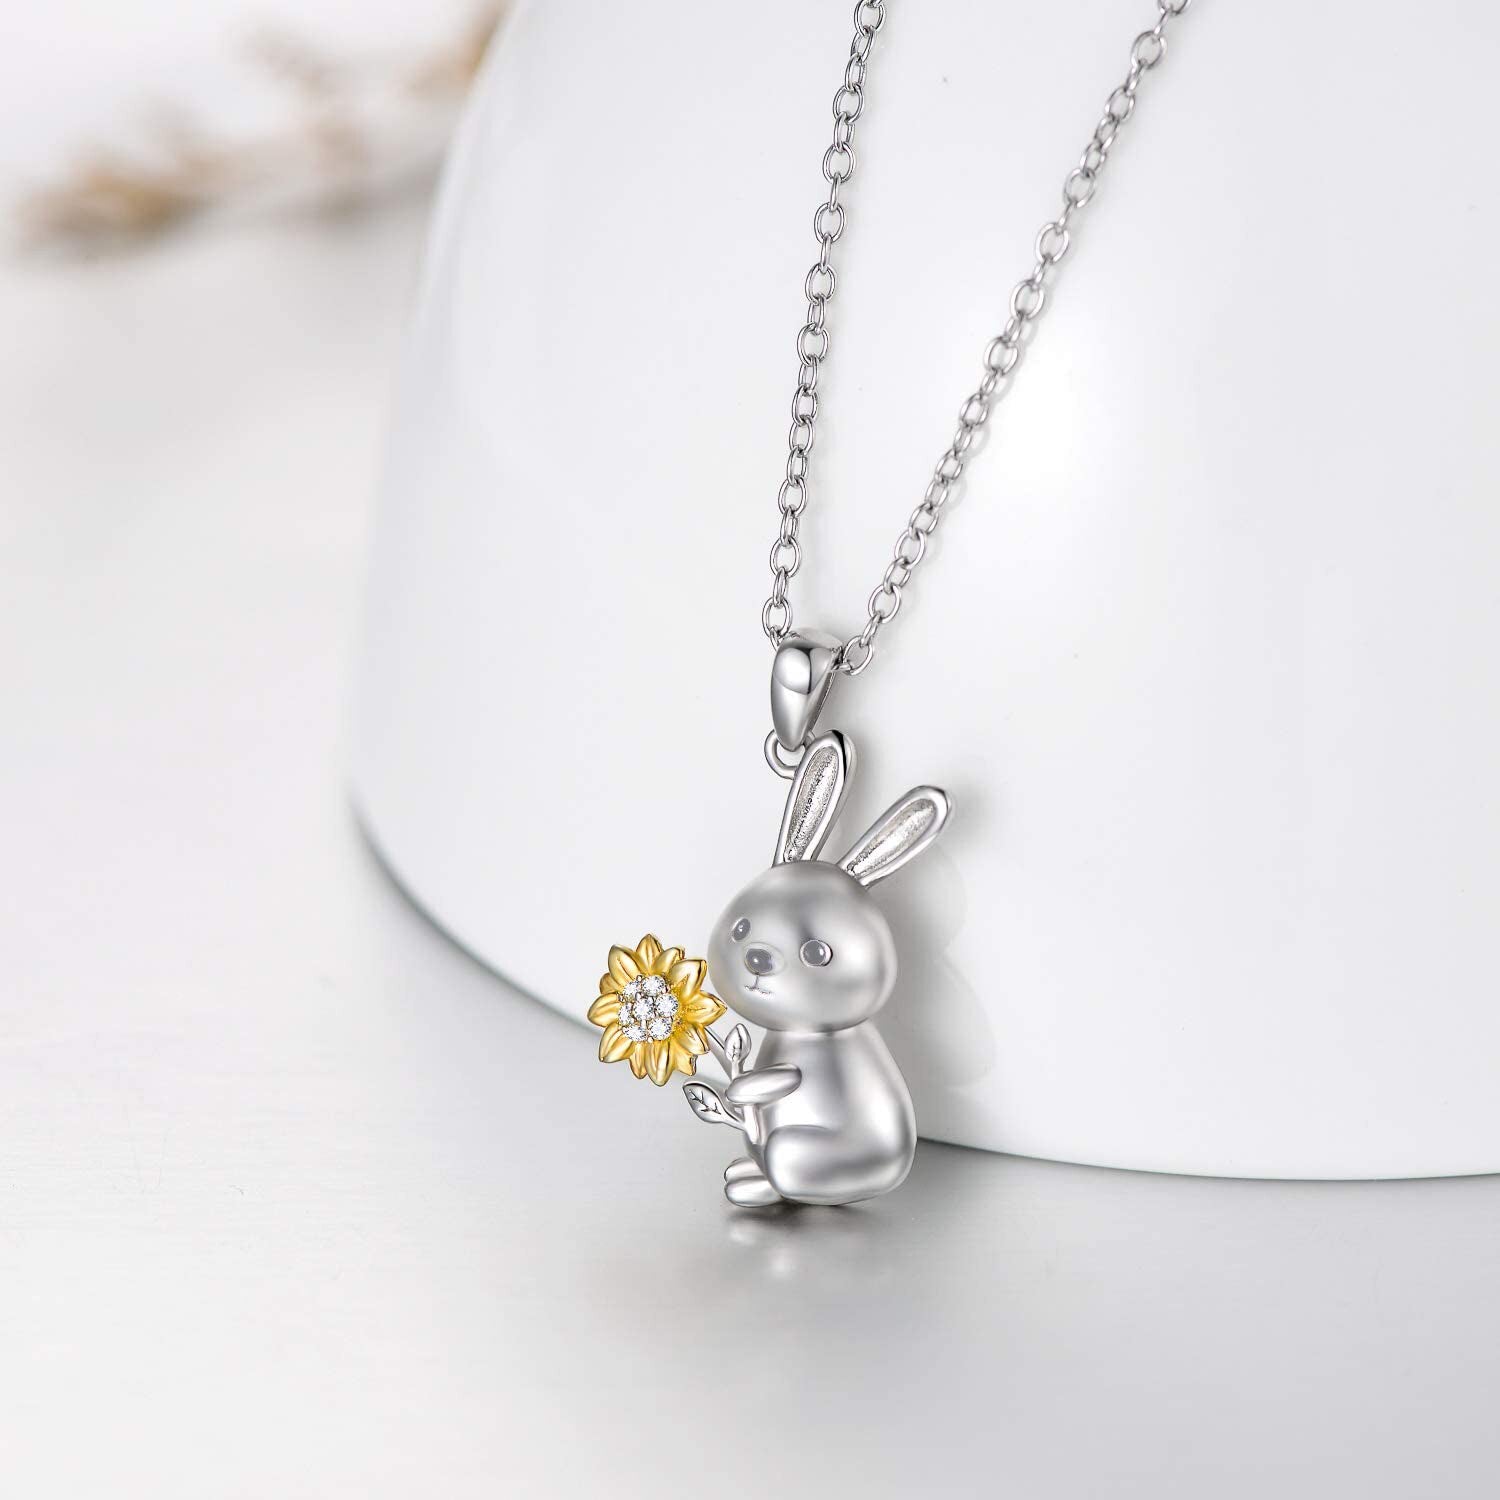 Rose Valley Sunflower Pendant Necklace for Women Rabbit Pendants Fashion Jewelry Girls Gifts YN029 - Charlie Dolly